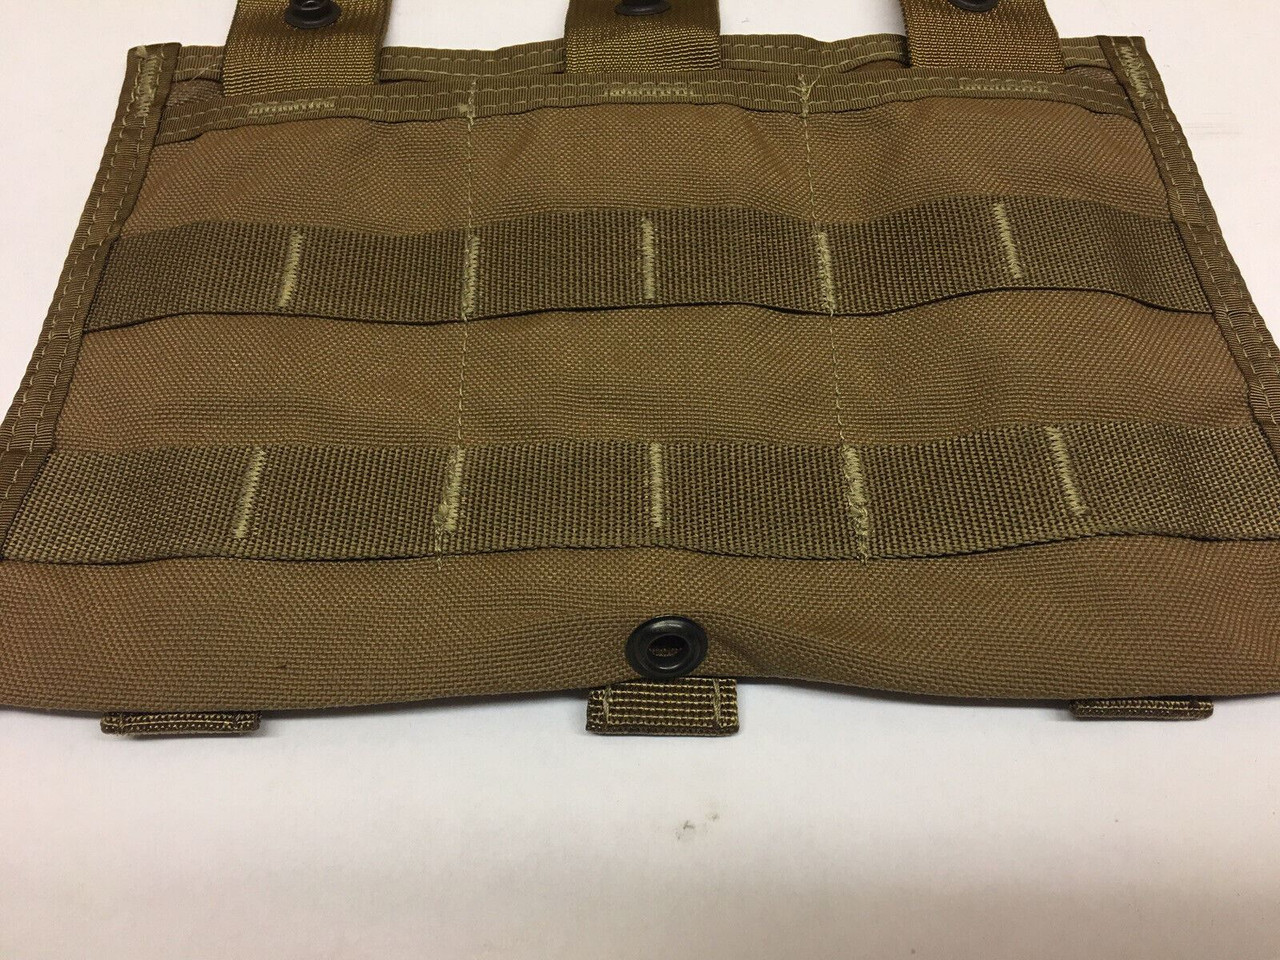 3 Mag M-4A1 Modular Carrier Pouch 8465-01-516-8415 Coyote Brown FSBE